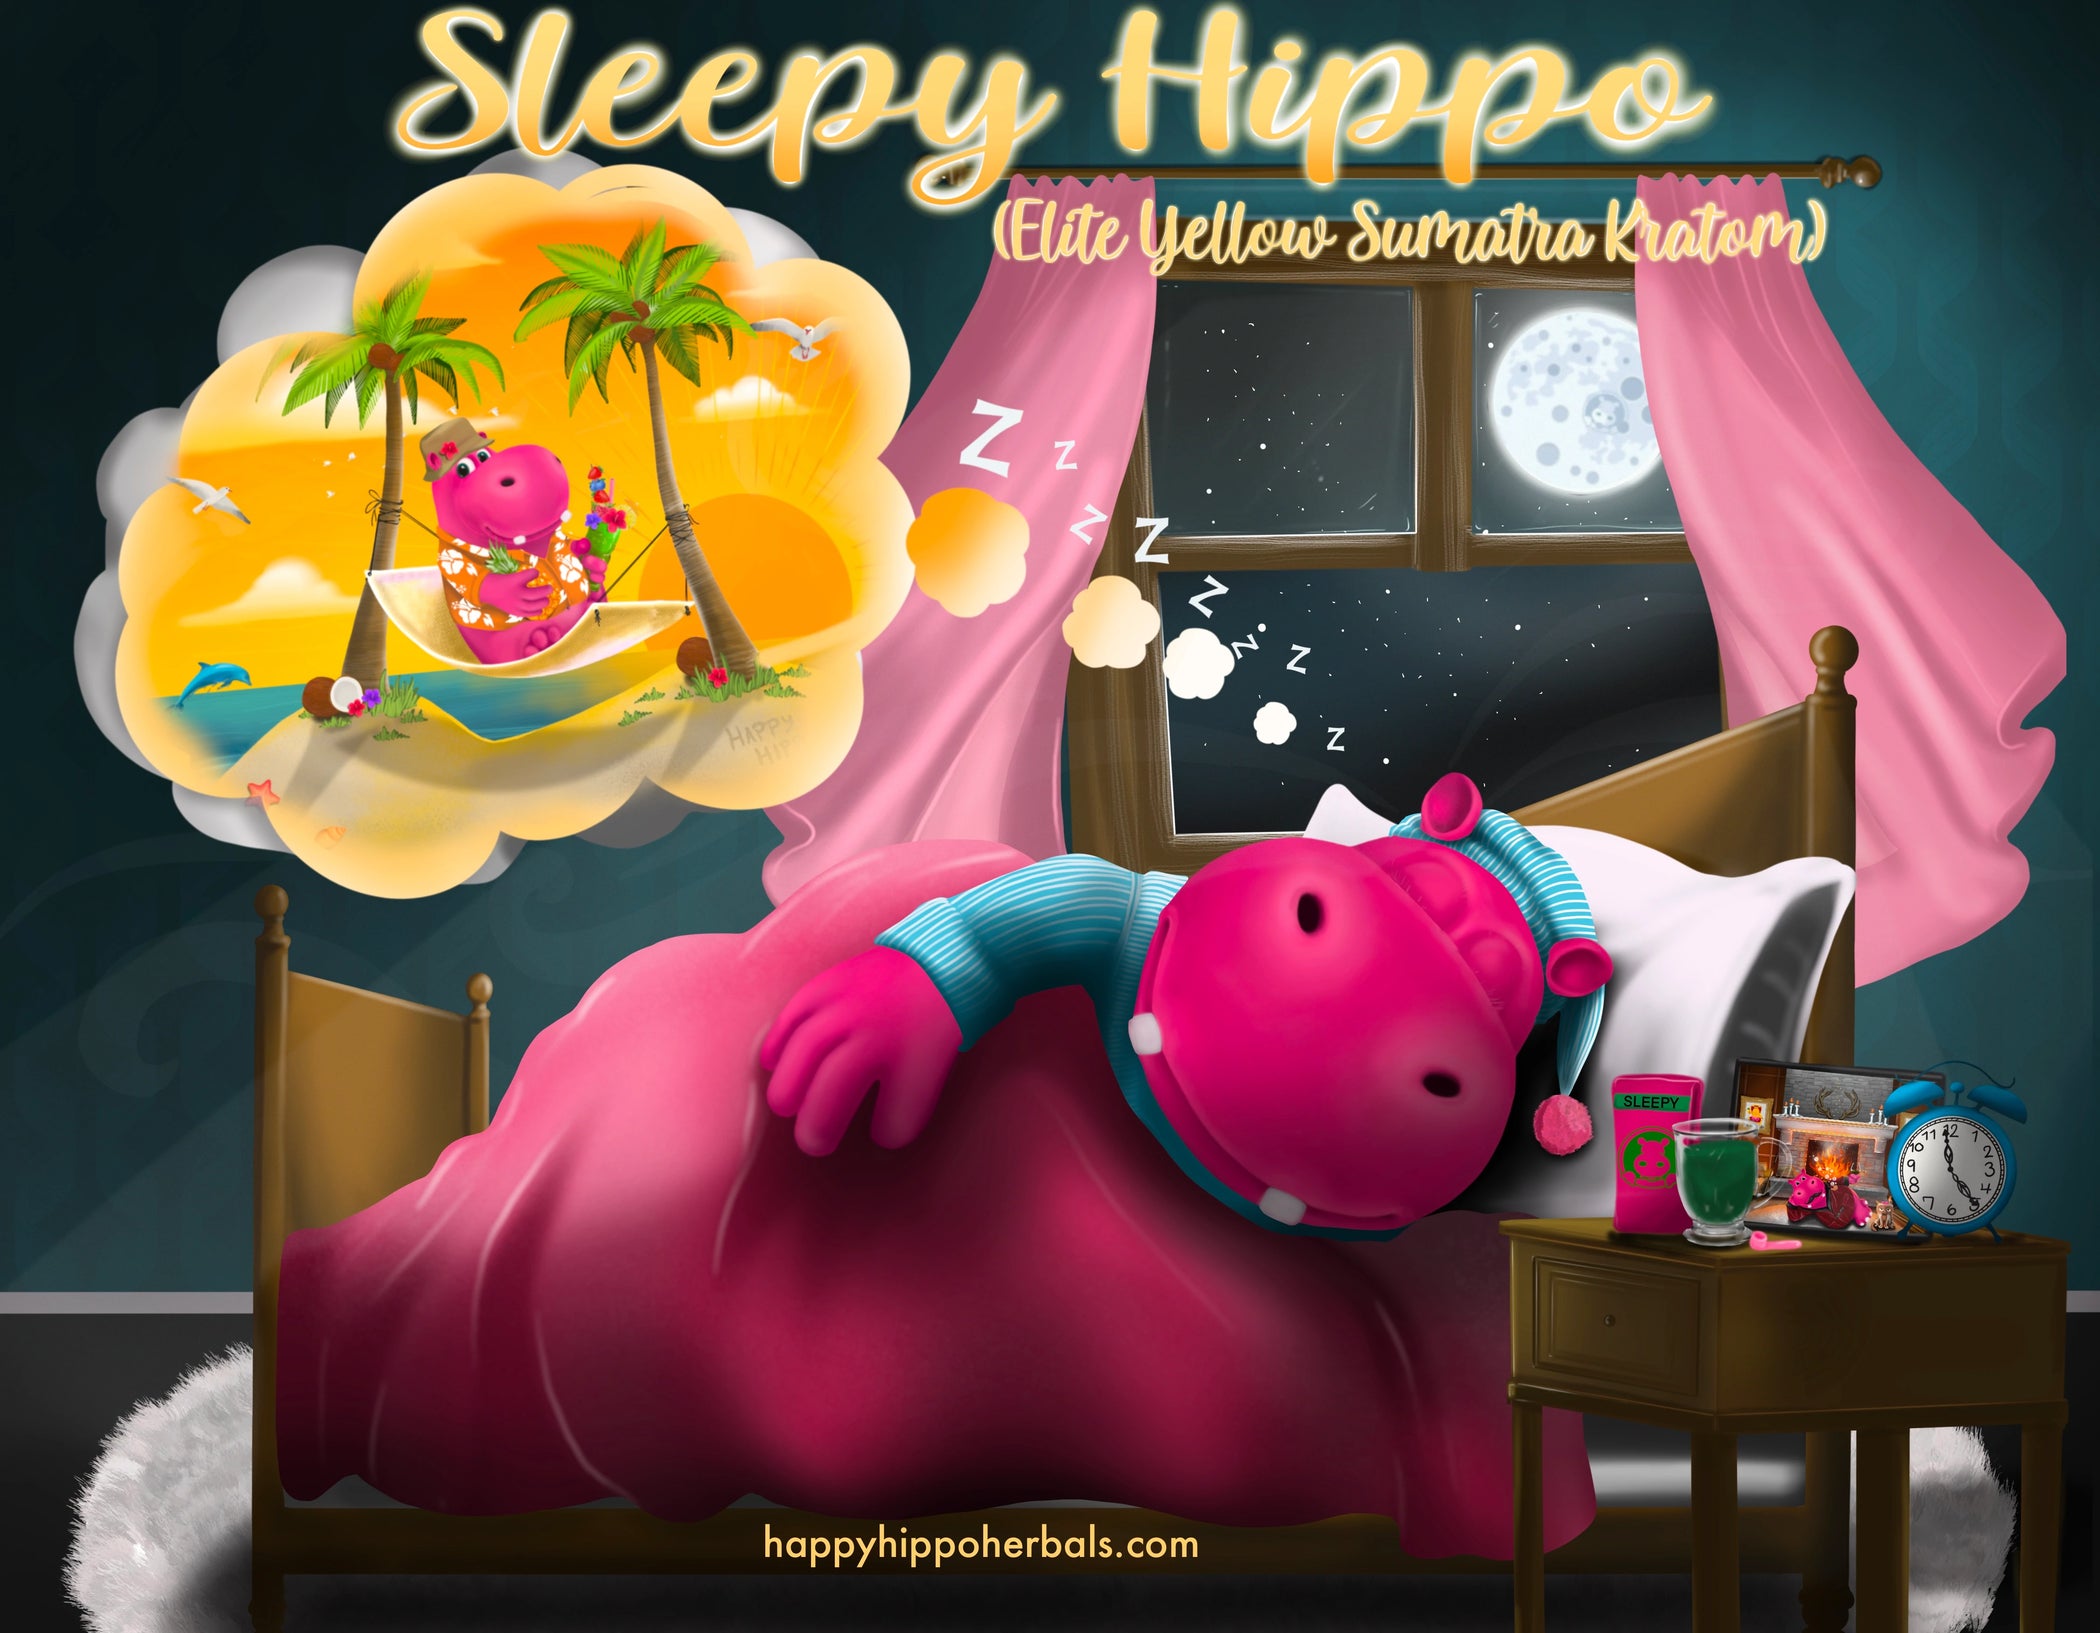 Graphic designed image depicting Puddles the Hippo gettings restful sleep while dreaming of a tropical beach and feeling the relaxed body effects after drinking a glass of kratom tea made from Yellow Sumatra Kratom Powder (Sleepy Hippo)